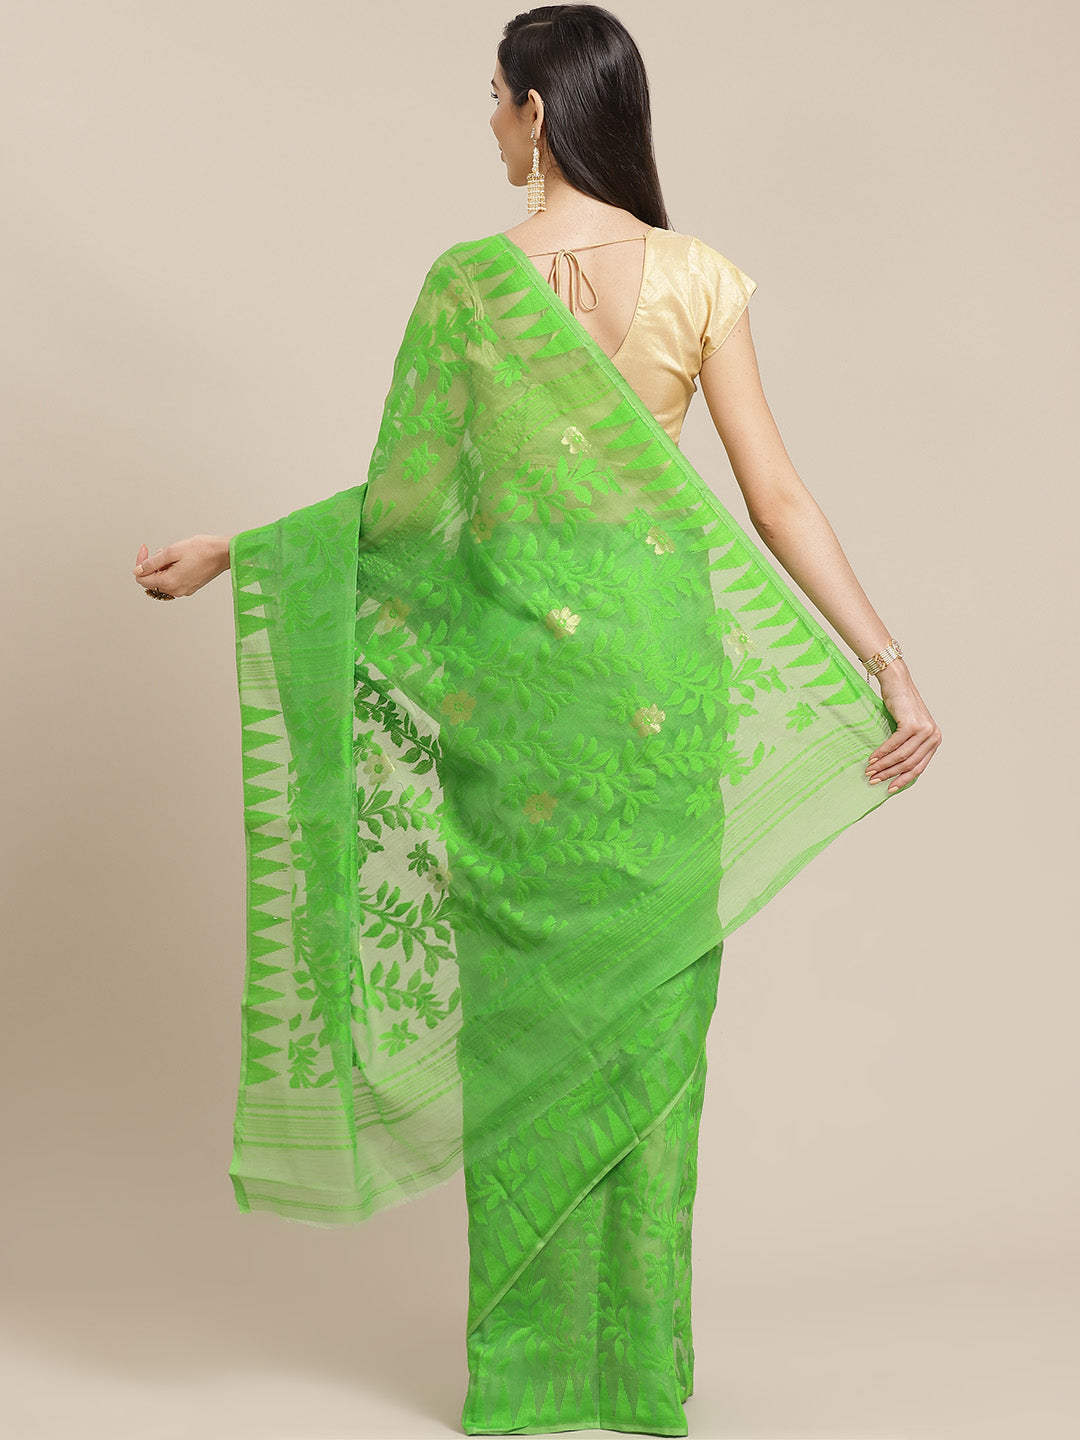 Green and Tan, Kalakari India Jamdani Silk Cotton Woven Design Saree without blouse CHBHSA0031-Saree-Kalakari India-CHBHSA0031-Bengal, Geographical Indication, Hand Crafted, Hand Painted, Heritage Prints, Jamdani, Natural Dyes, Red, Sarees, Silk Blended, Sustainable Fabrics, Woven, Yellow-[Linen,Ethnic,wear,Fashionista,Handloom,Handicraft,Indigo,blockprint,block,print,Cotton,Chanderi,Blue, latest,classy,party,bollywood,trendy,summer,style,traditional,formal,elegant,unique,style,hand,block,print,